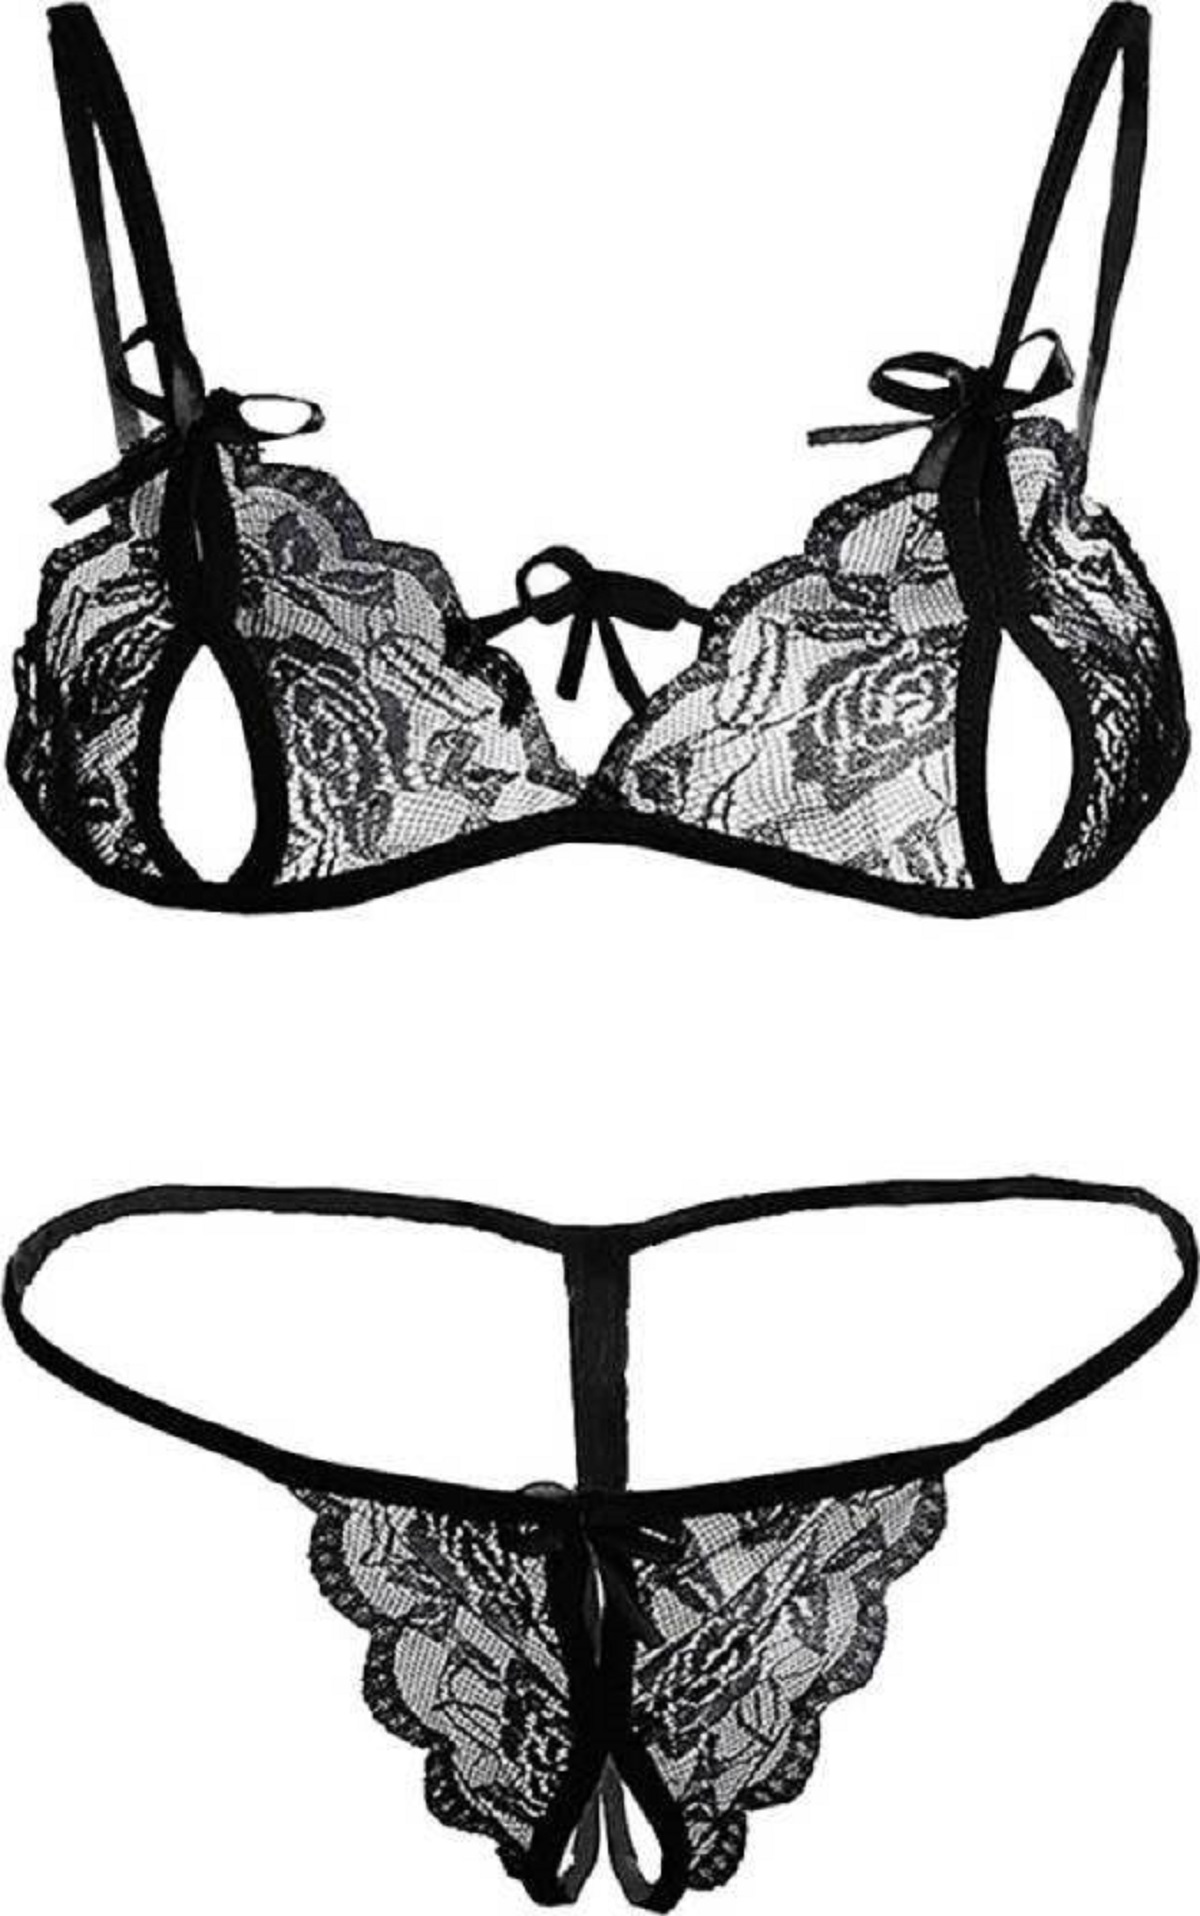 Buy Glorious Choice Women's Lace Bra with Crotchless G String Panty ...